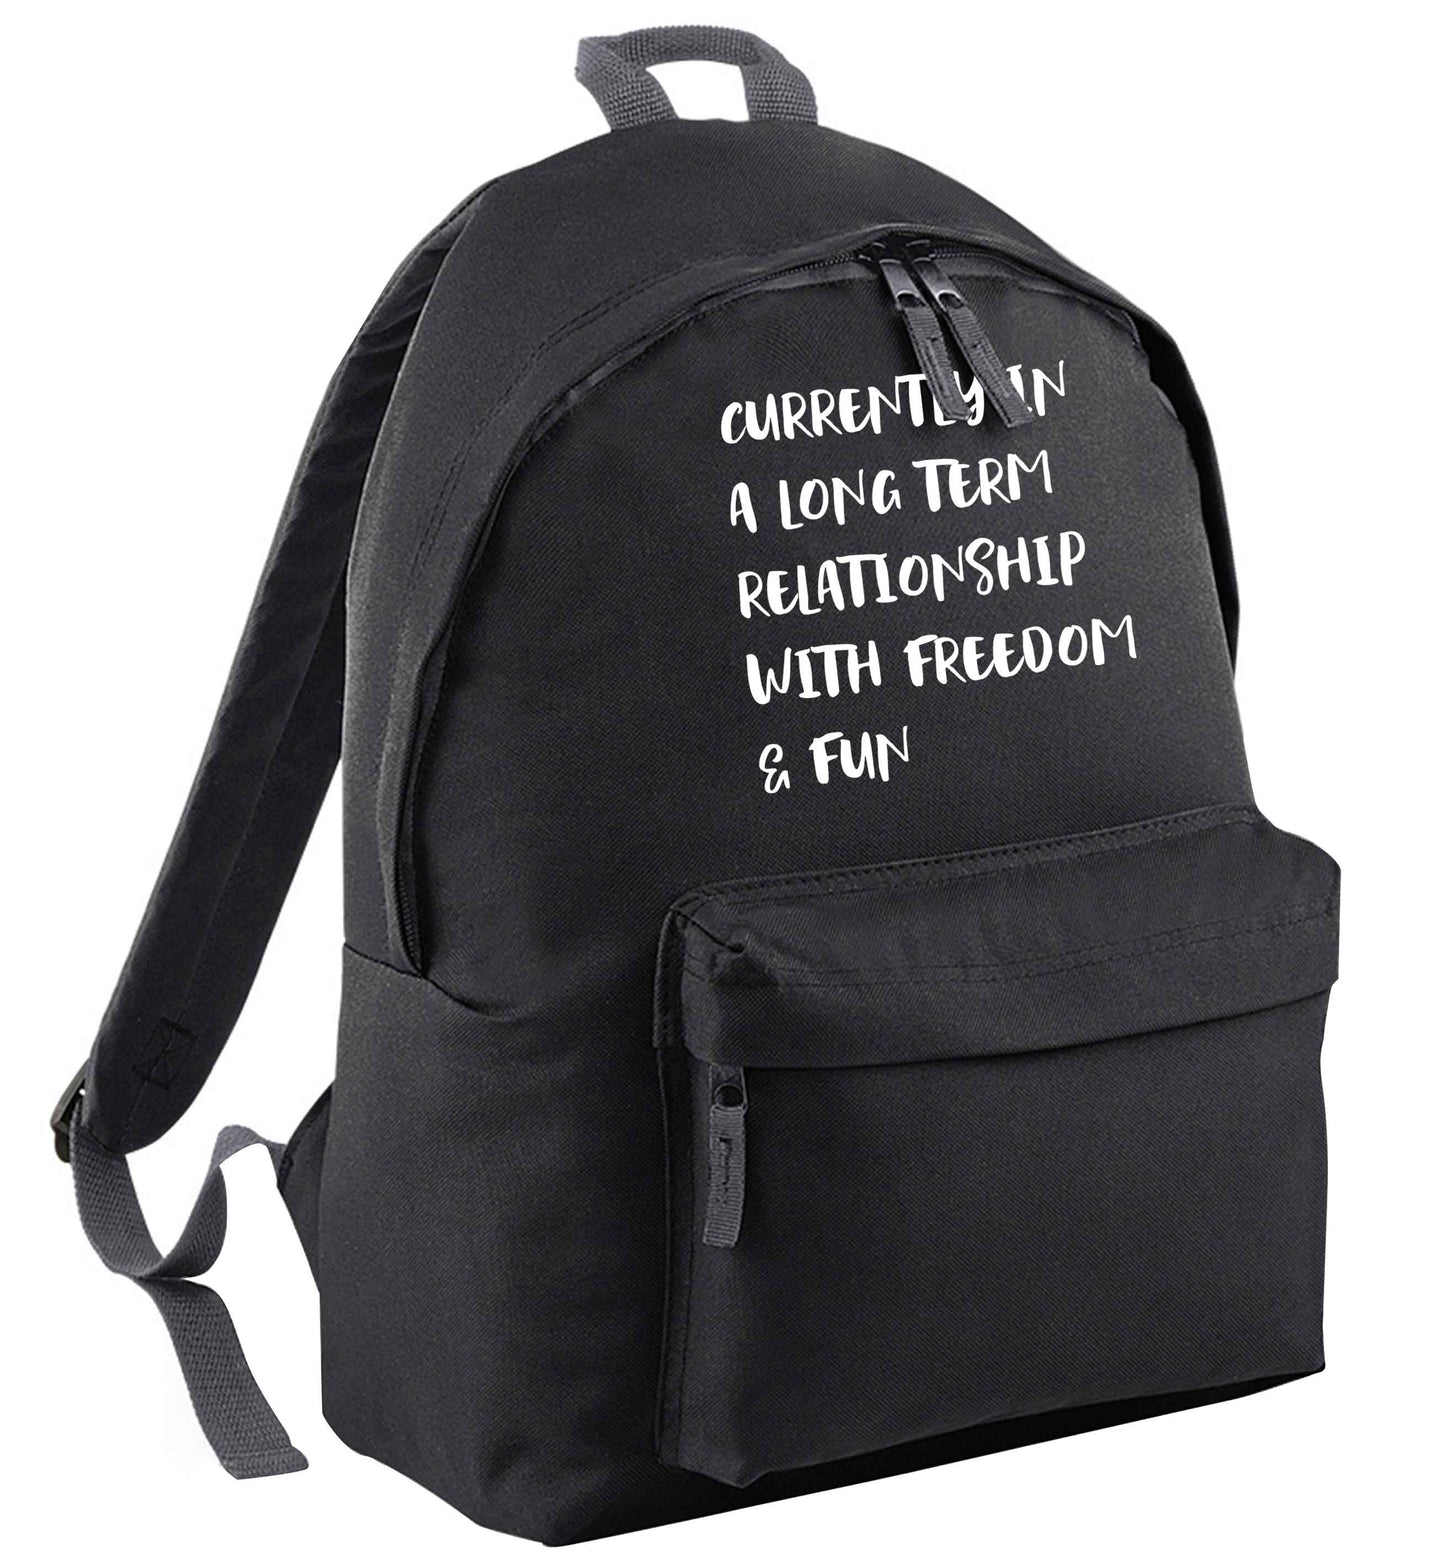 Currently in a long term relationship with freedom and fun black adults backpack